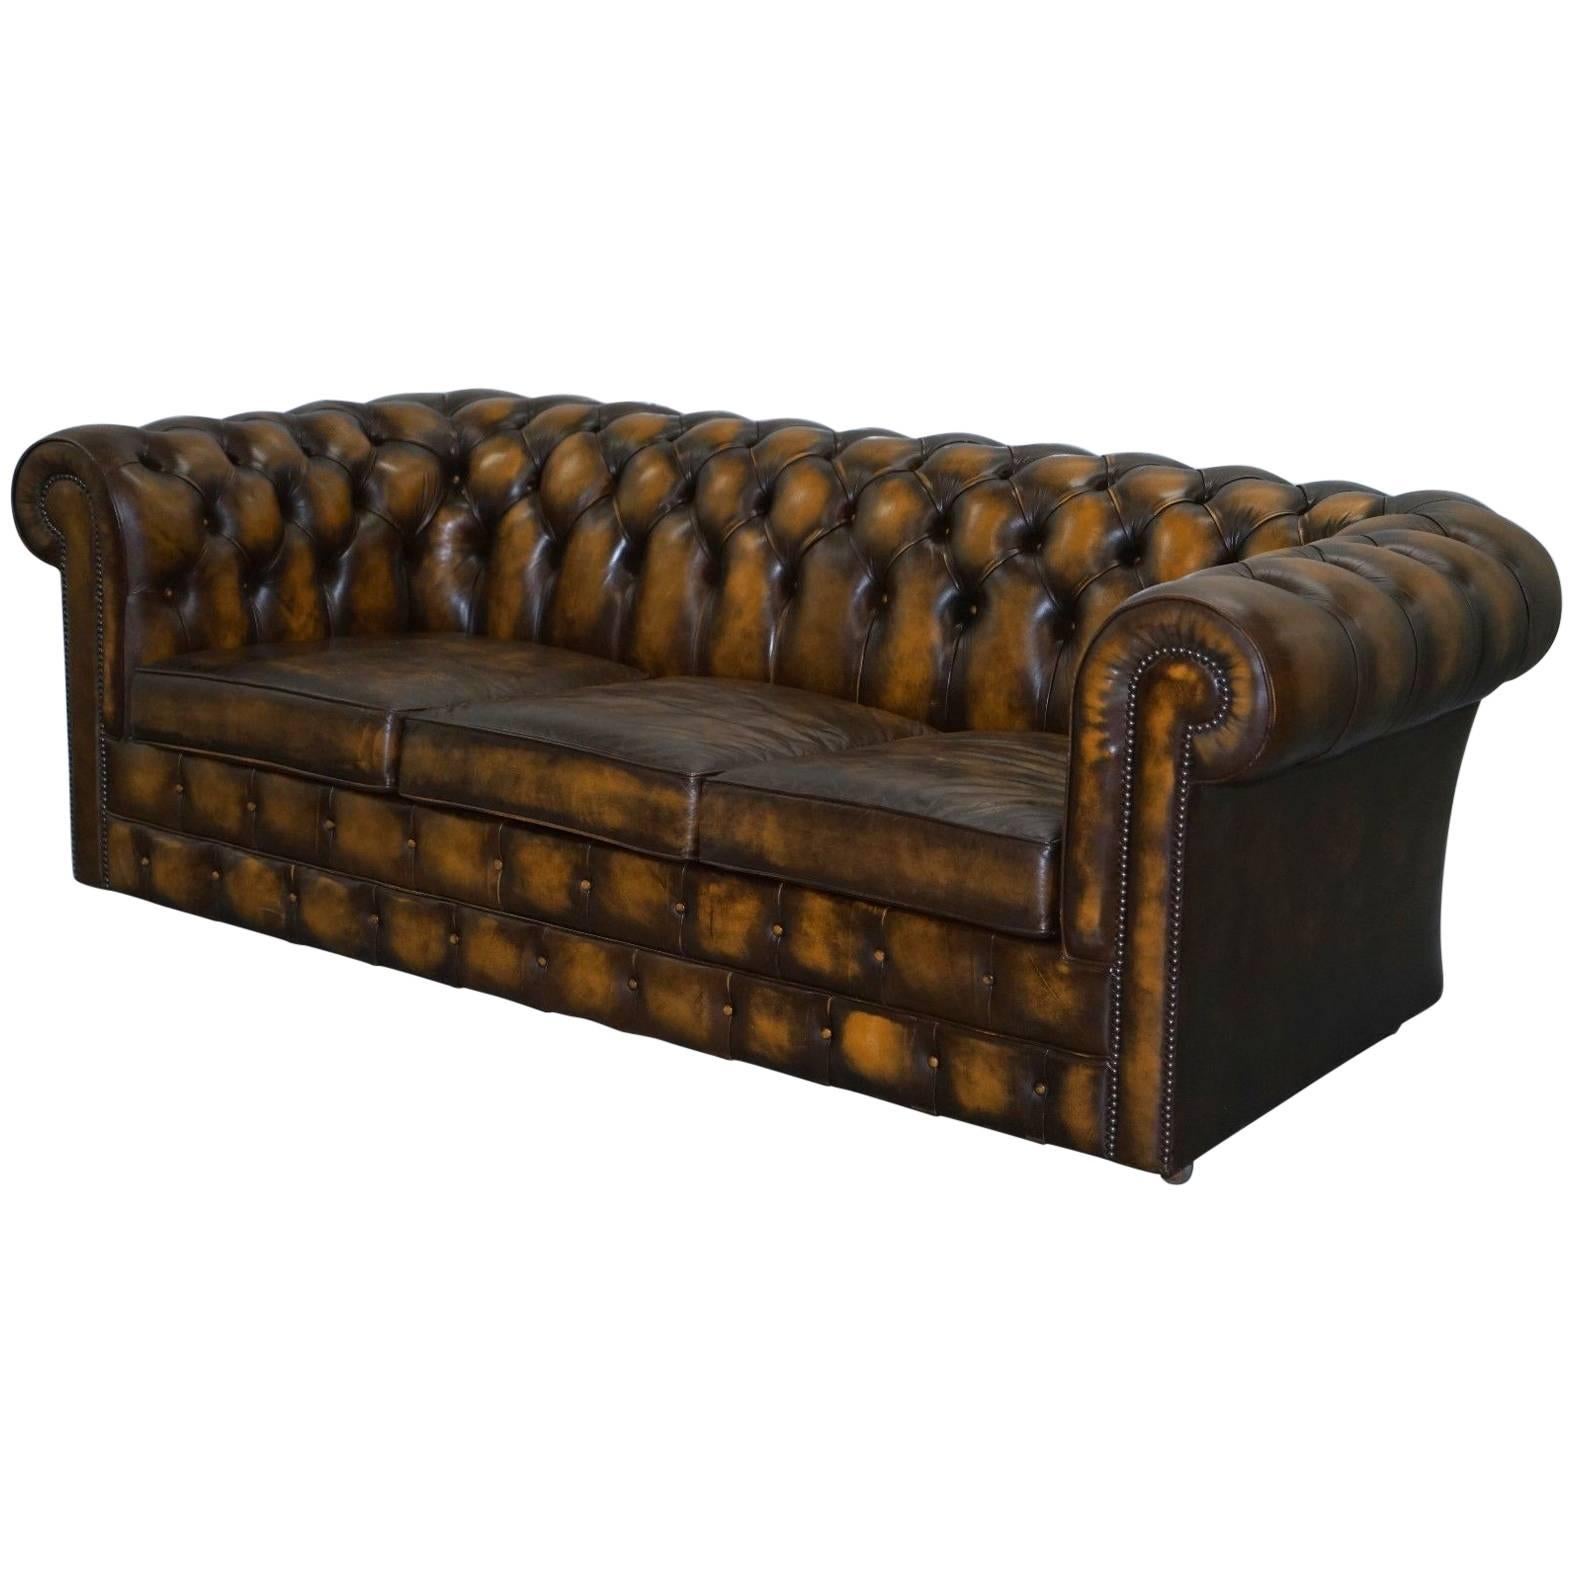 Substantial Hand Dyed Aged Brown Leather Chesterfield Sofa Bed from Mill Rook